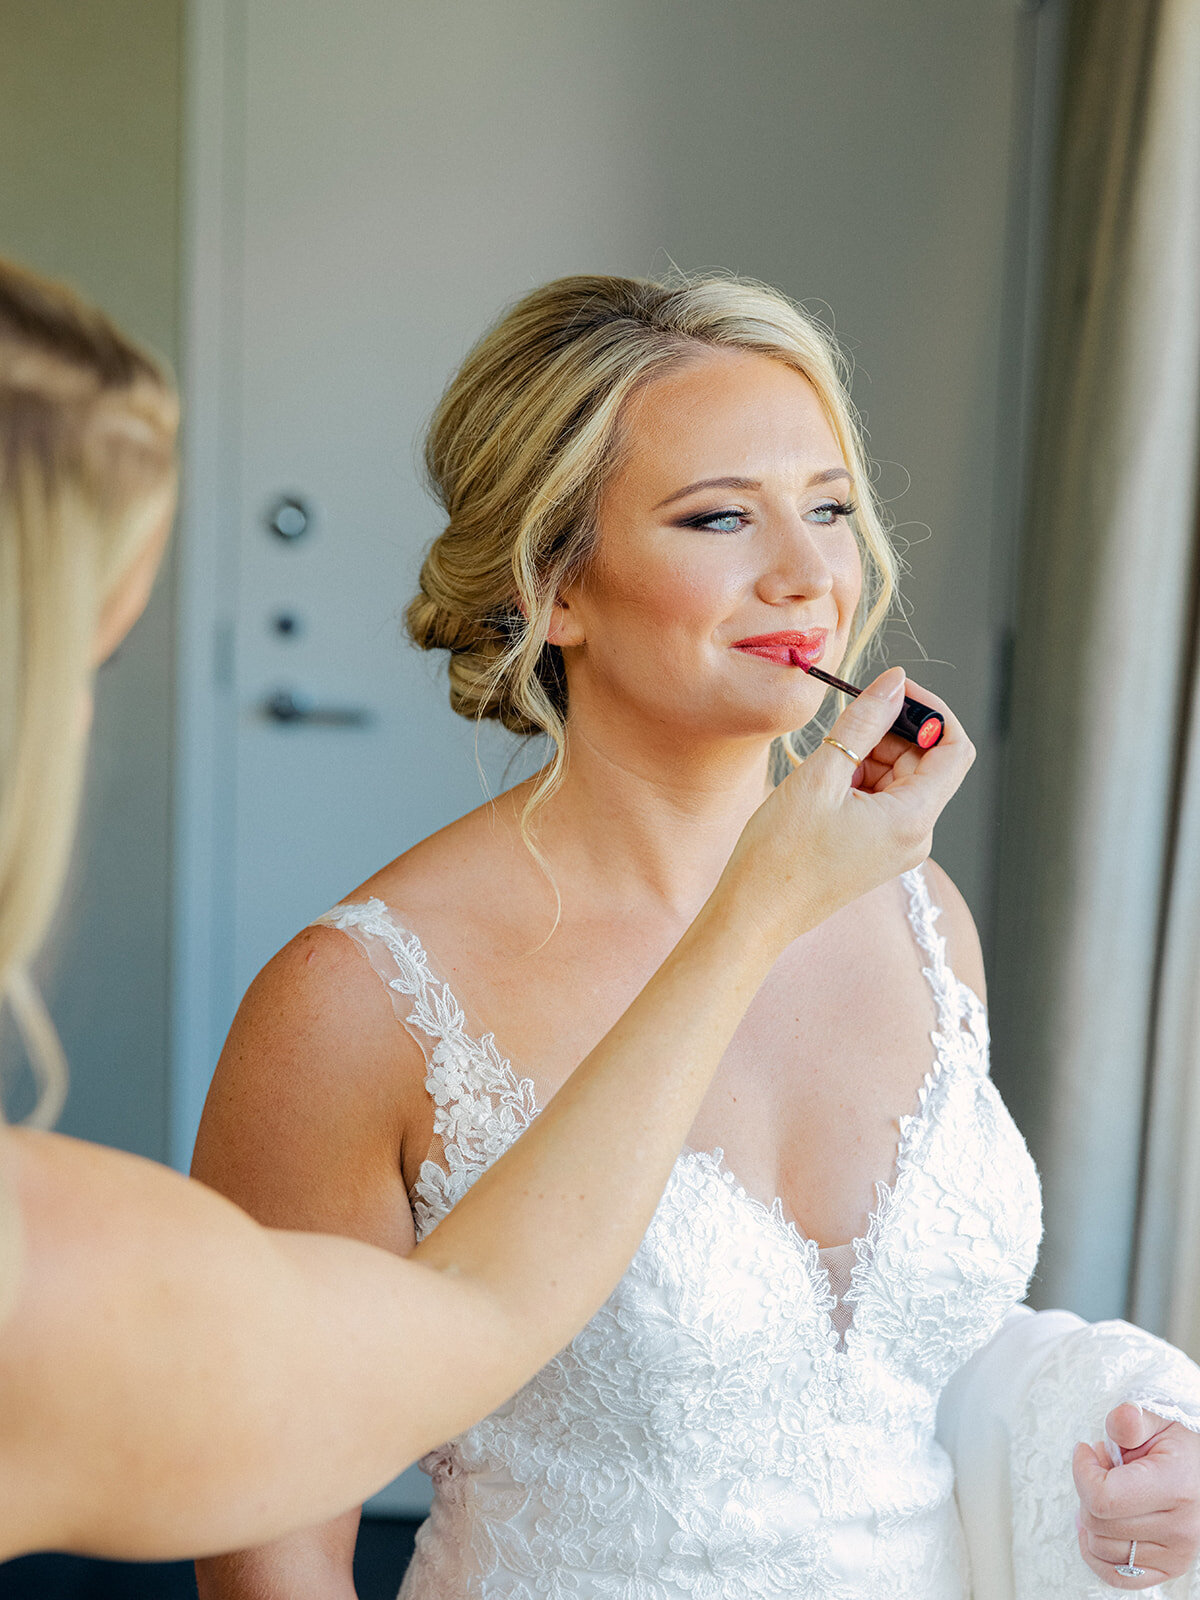 bride getting ready for her wedding day with her bridesmaids and putting on lip gloss